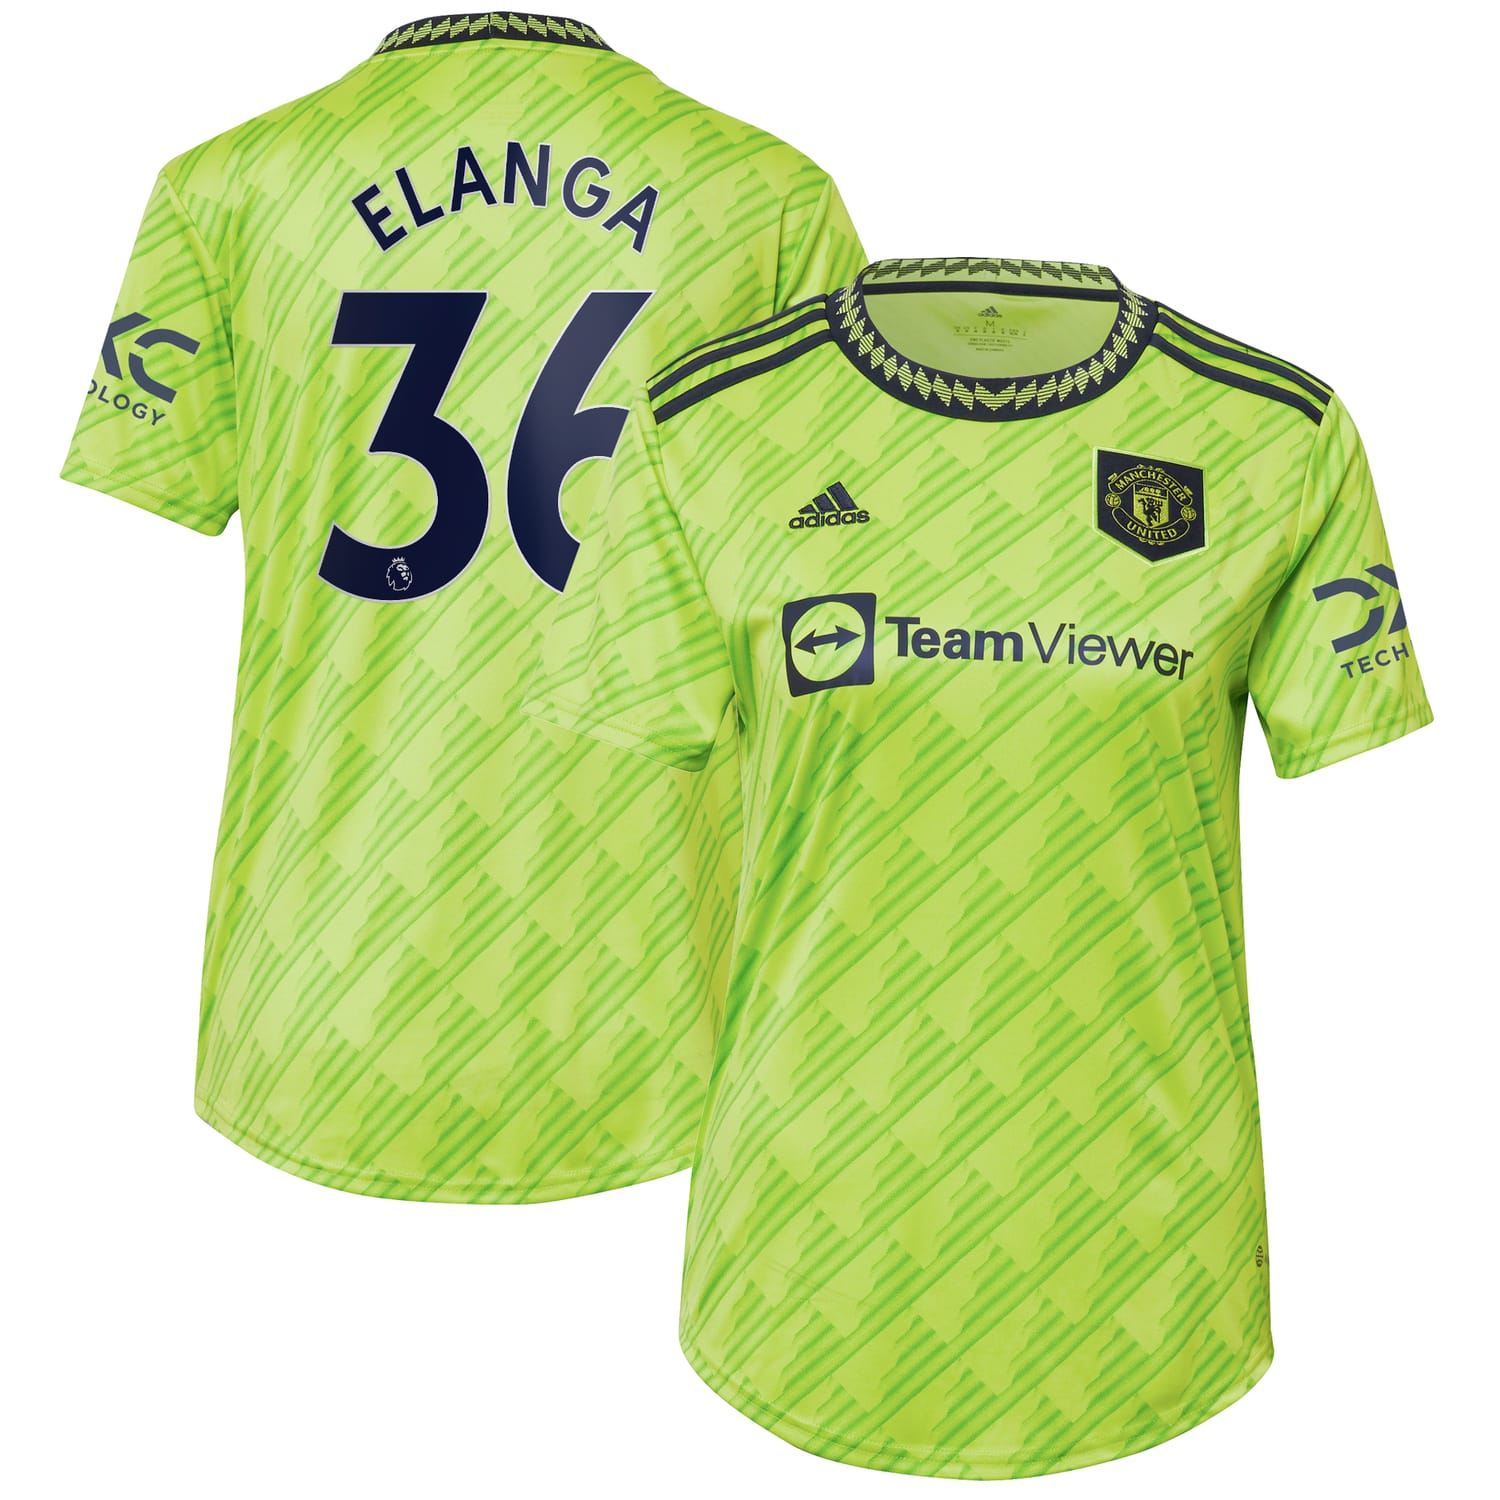 Premier League Manchester United Third Jersey Shirt 2022-23 player Anthony Elanga 36 printing for Women